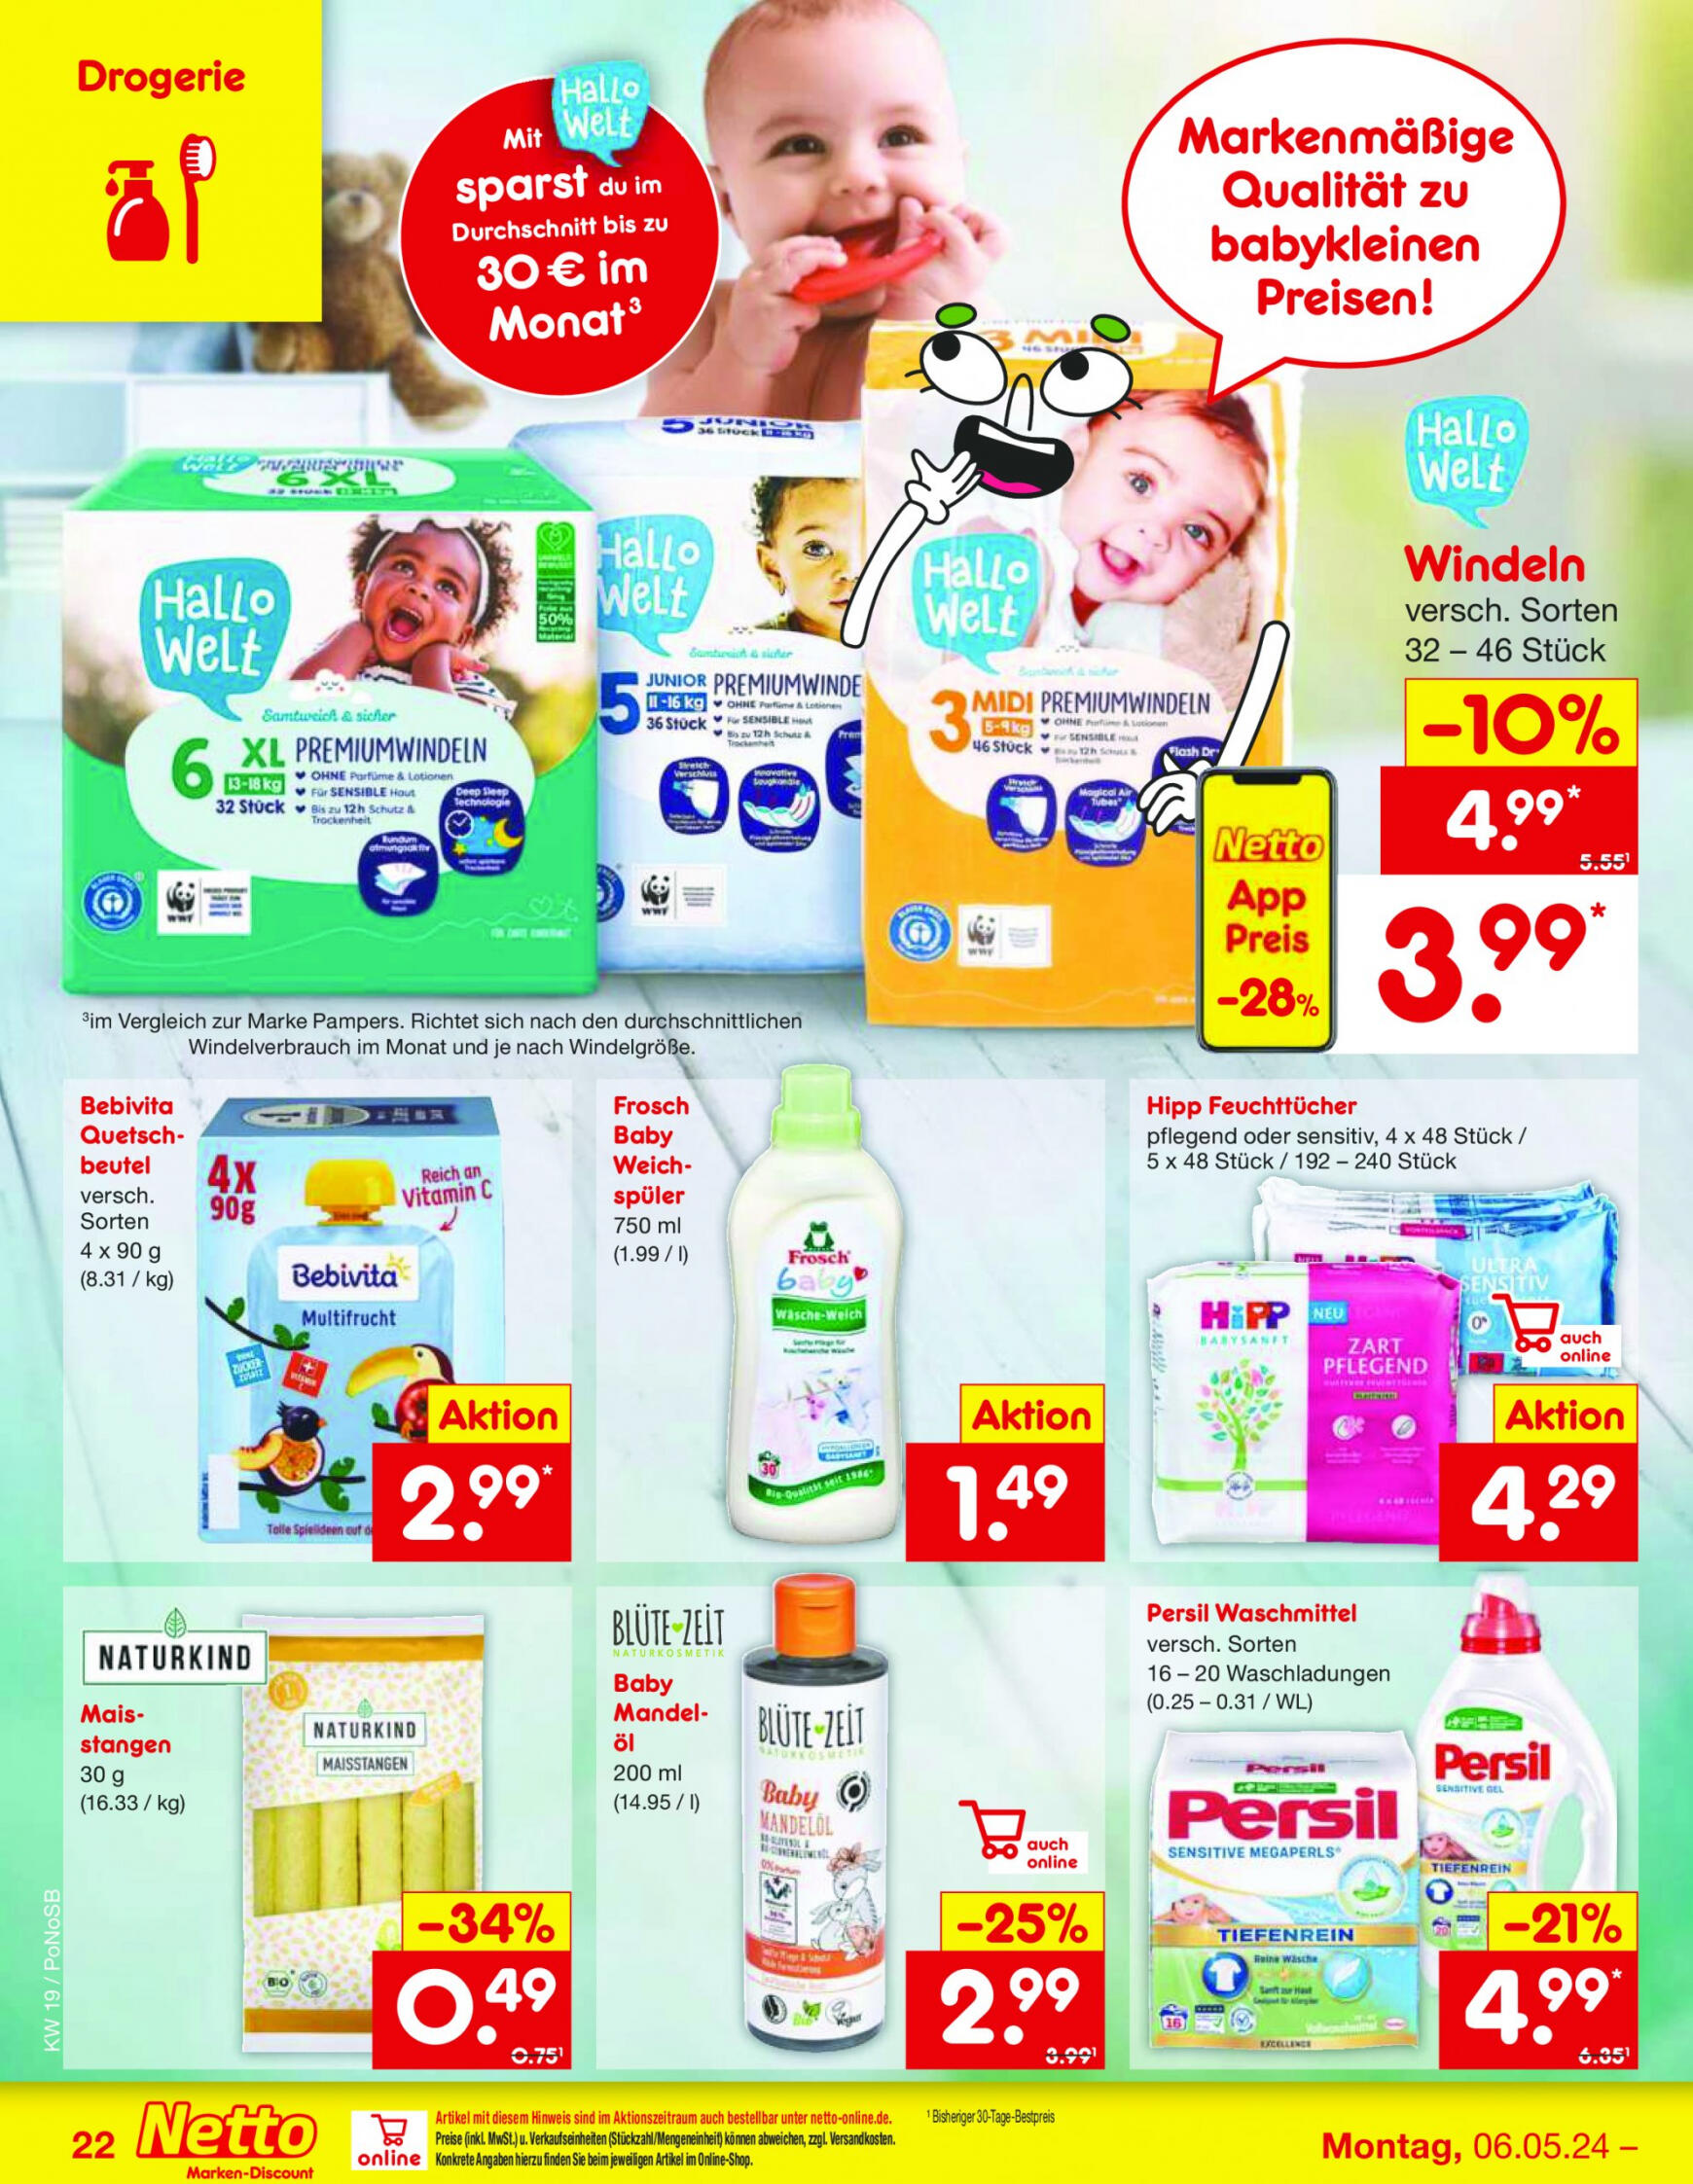 netto - Flyer Netto aktuell 06.05. - 11.05. - page: 30